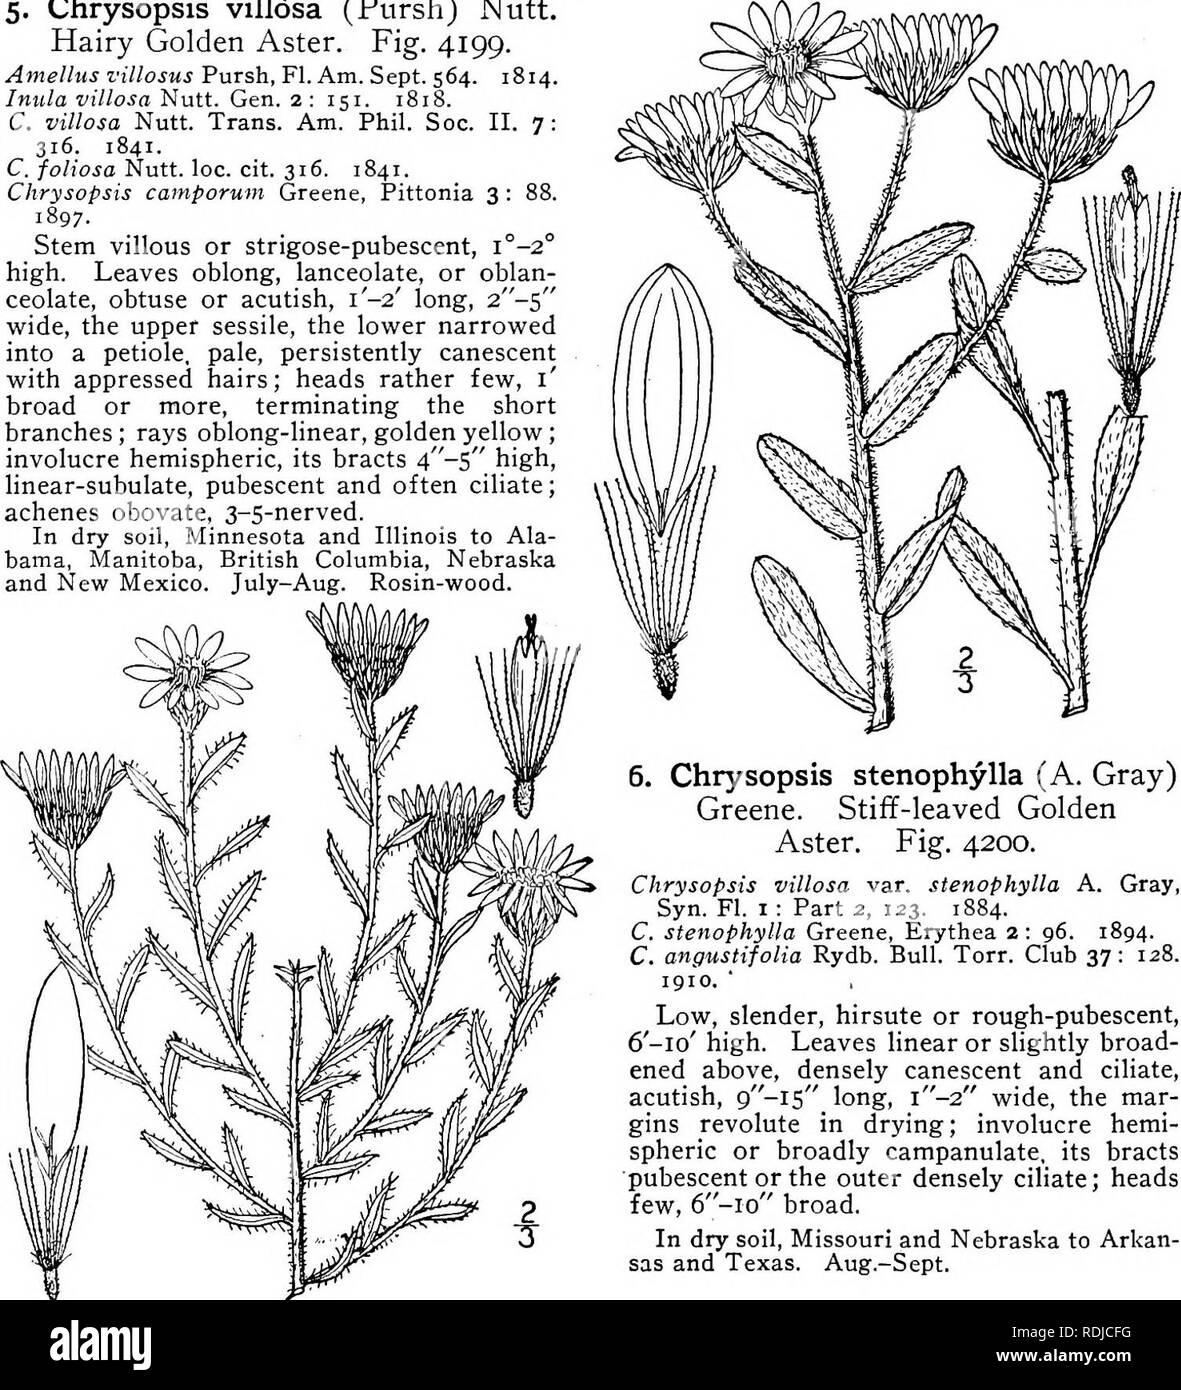 . An illustrated flora of the northern United States, Canada and the British possessions, from Newfoundland to the parallel of the southern boundary of Virginia, and from the Atlantic Ocean westward to the 102d meridian. Botany; Botany. 5. Chrysopsis villosa (Pursh) Nutt. Hairy Golden Aster. Fig. 4199. Amelias villosus Pursh, Fl. Am. Sept. 564. 1814. Inula villosa Nutt. Gen. 2: 151. 1818. C. villosa Nutt. Trans. Am. Phil. Soc. II. 7: 316. 1841. C. foliosa Nutt. loc. cit. 316. 1841. Chrysopsis camporum Greene, Pittonia 3: 88. 1897. Stem villous or strigose-pubescent, i°-2° high. Leaves oblong,  Stock Photo